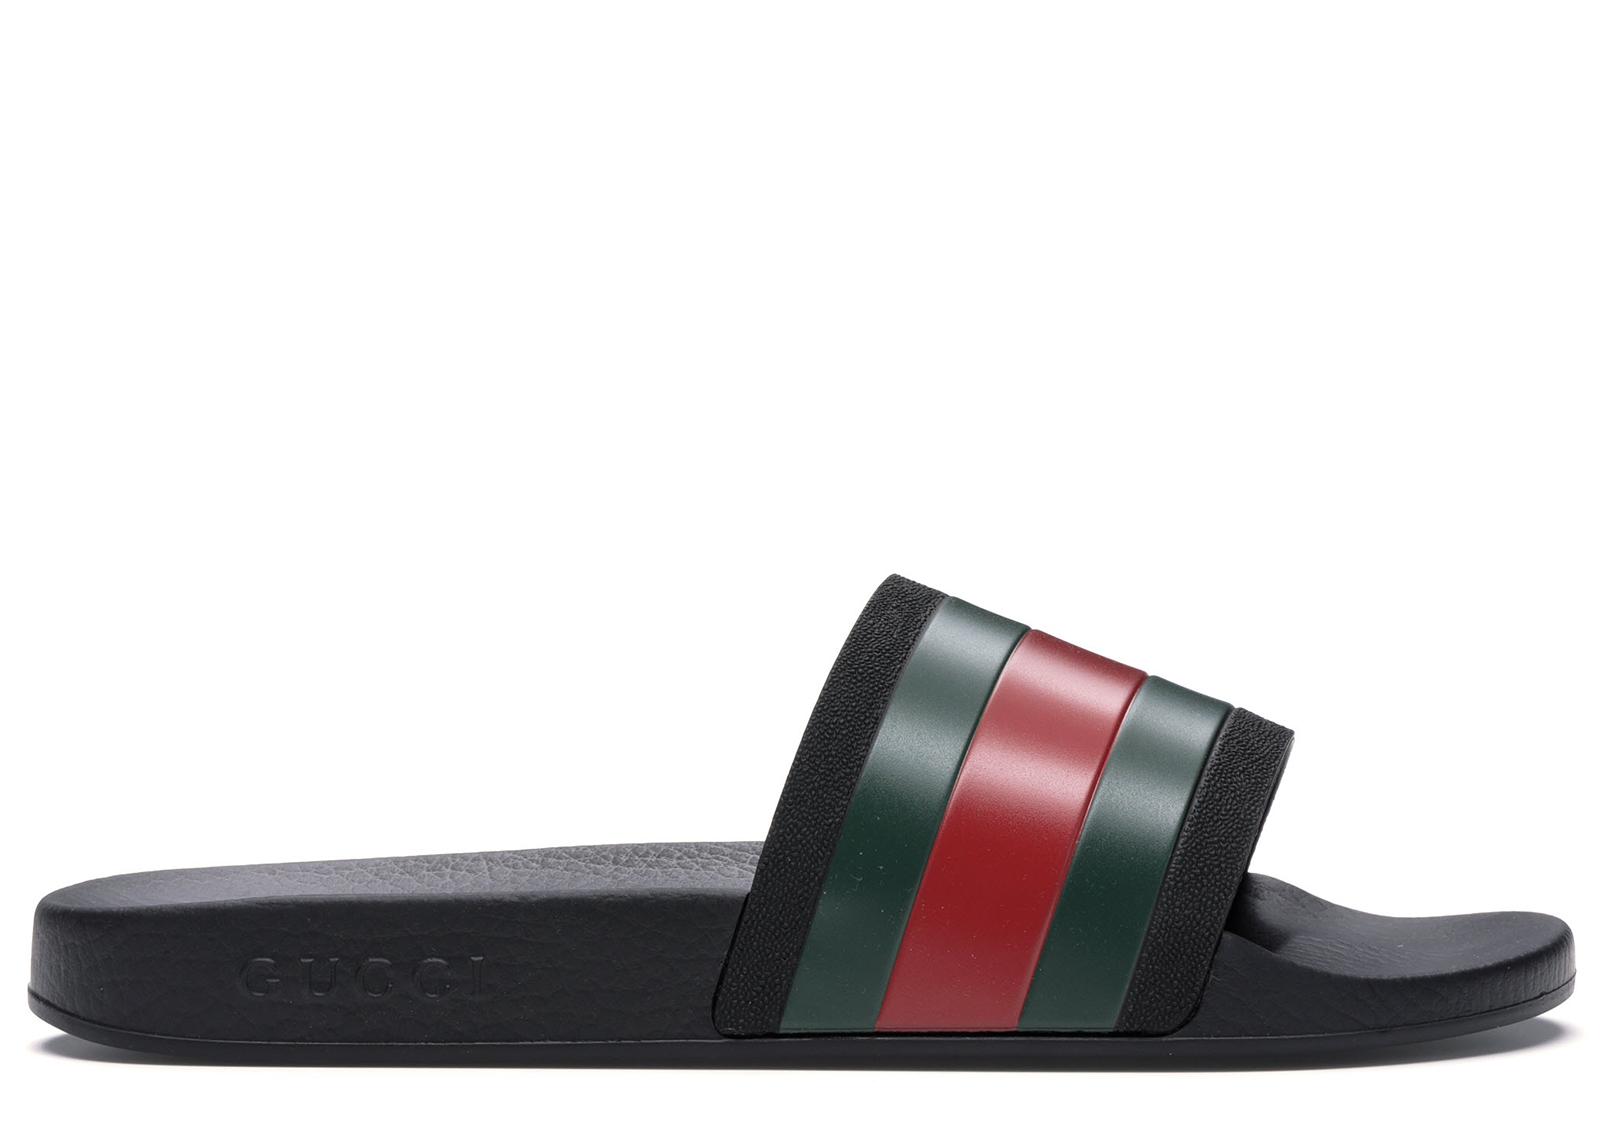 gucci flip flops green and red